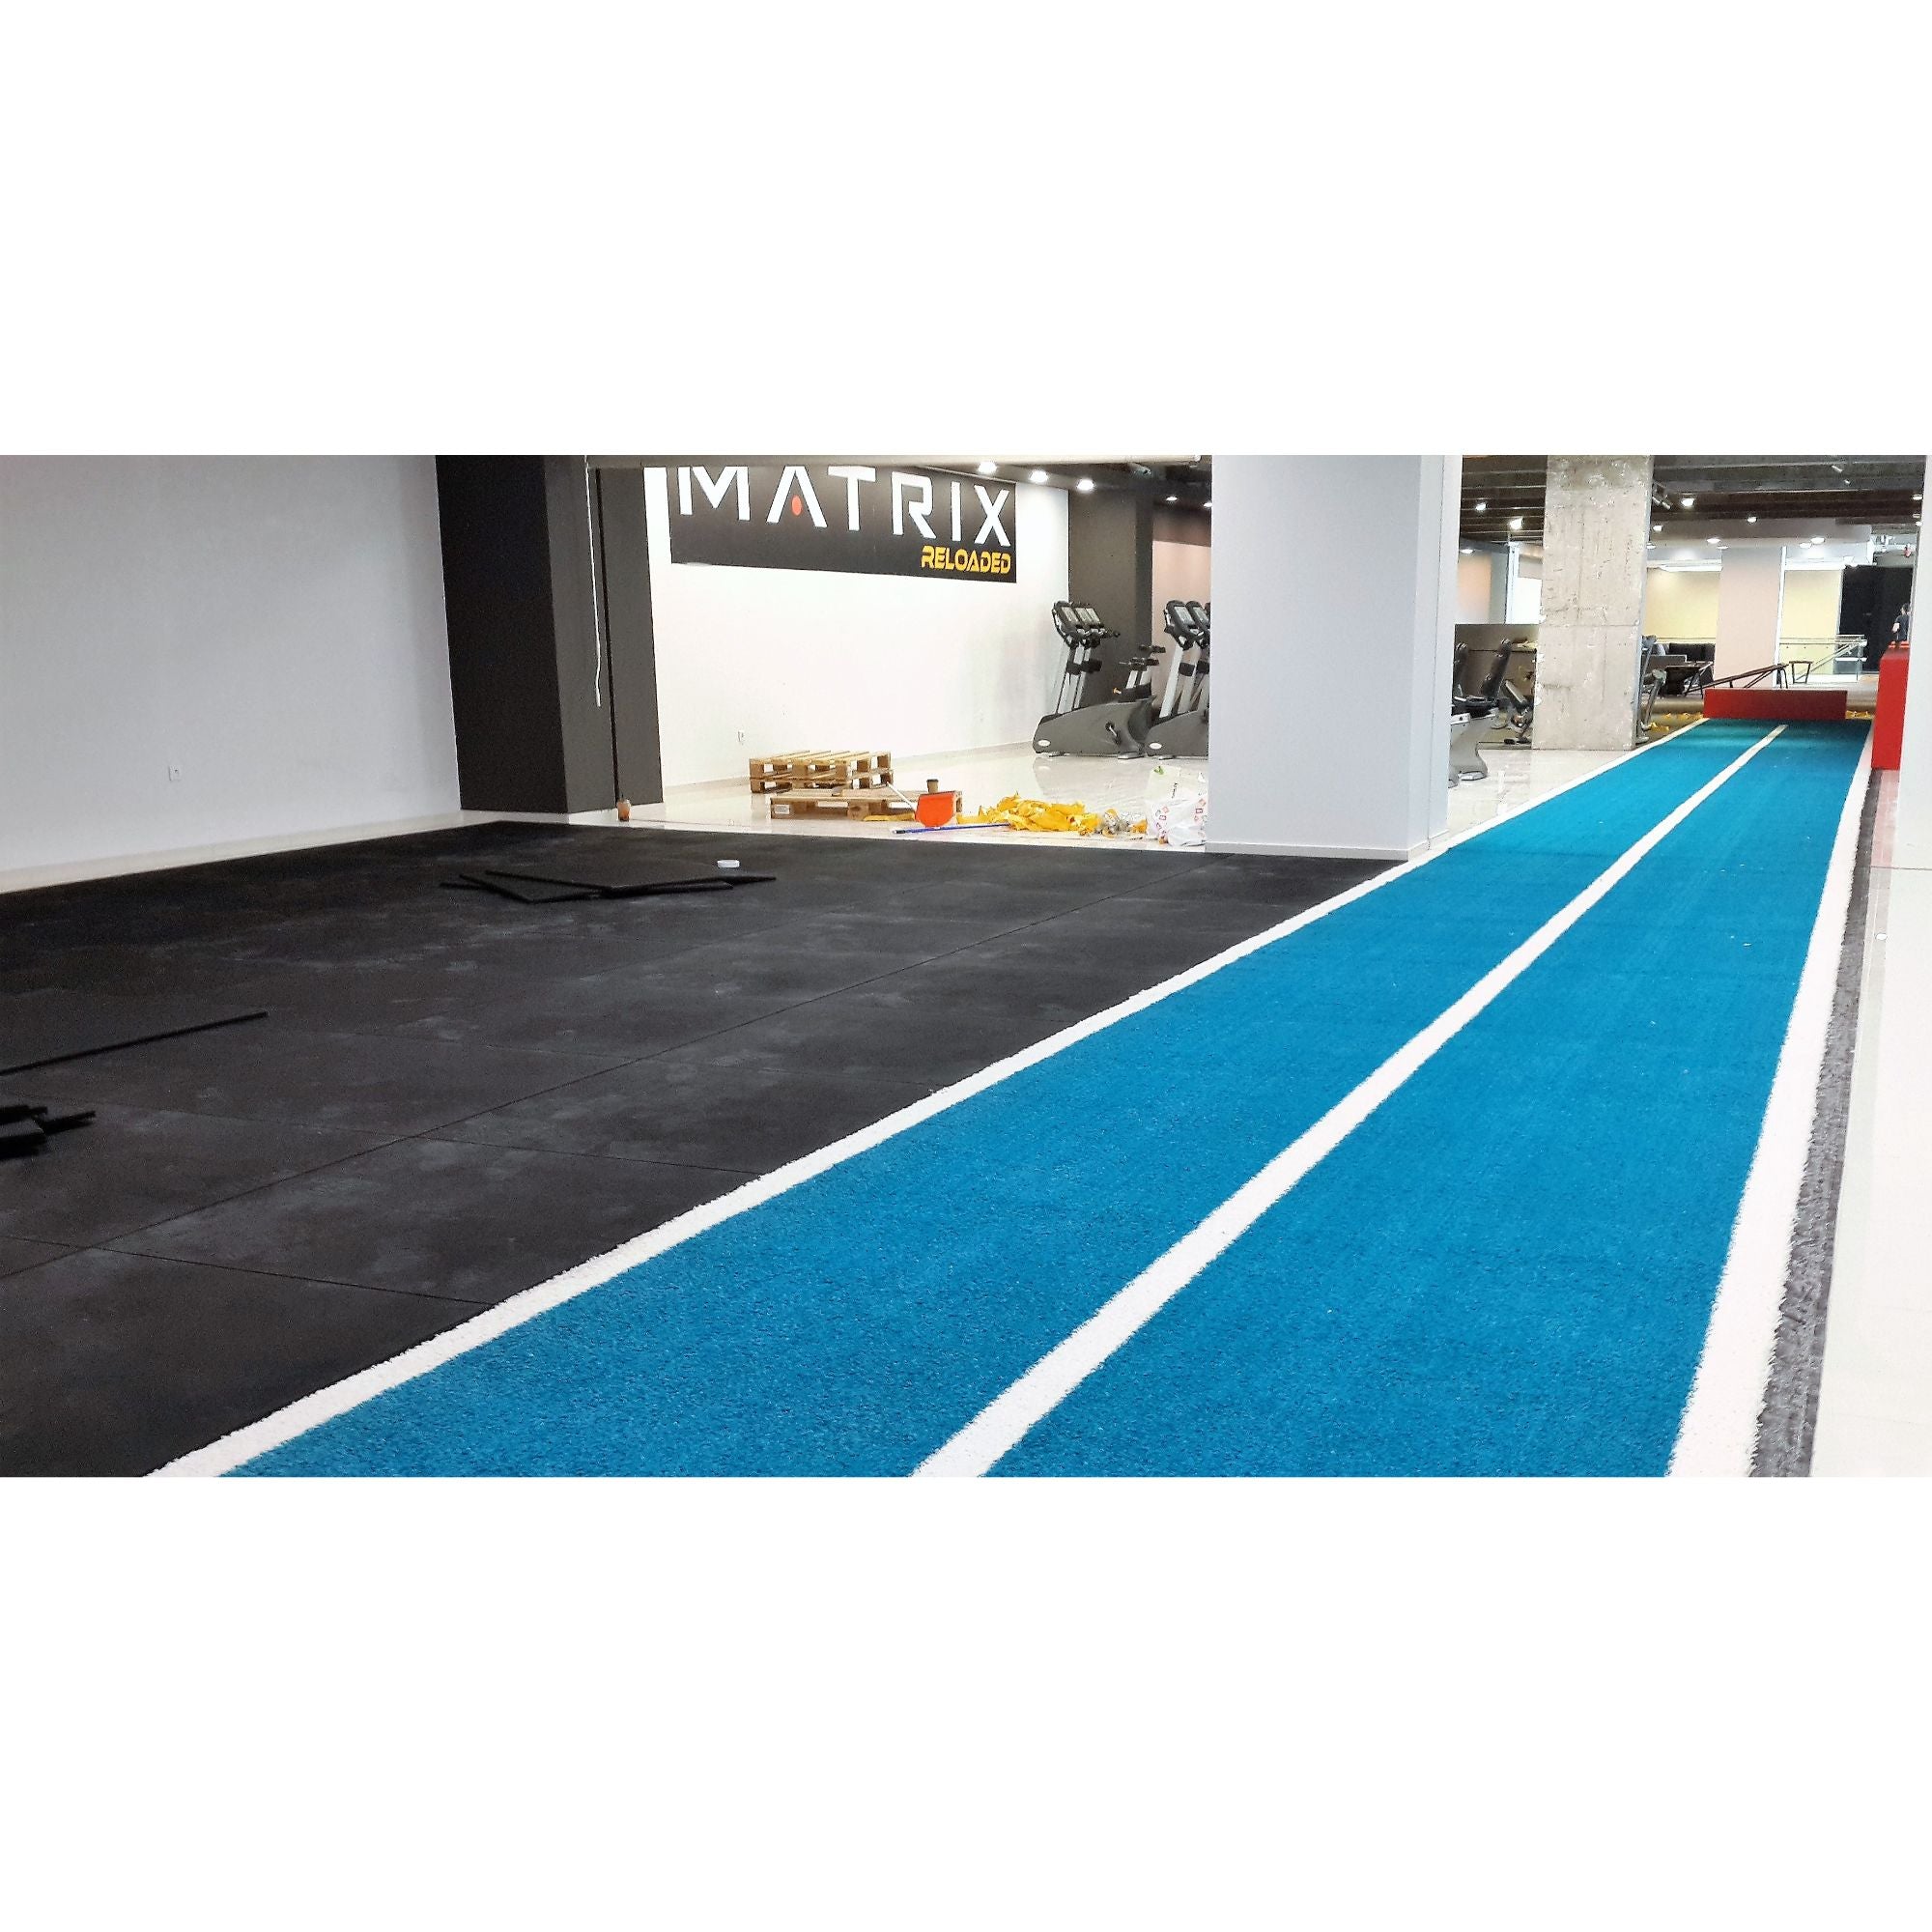 Gym Running and Sled Track 10m x 2m available in red, green or blue - Cannons UK